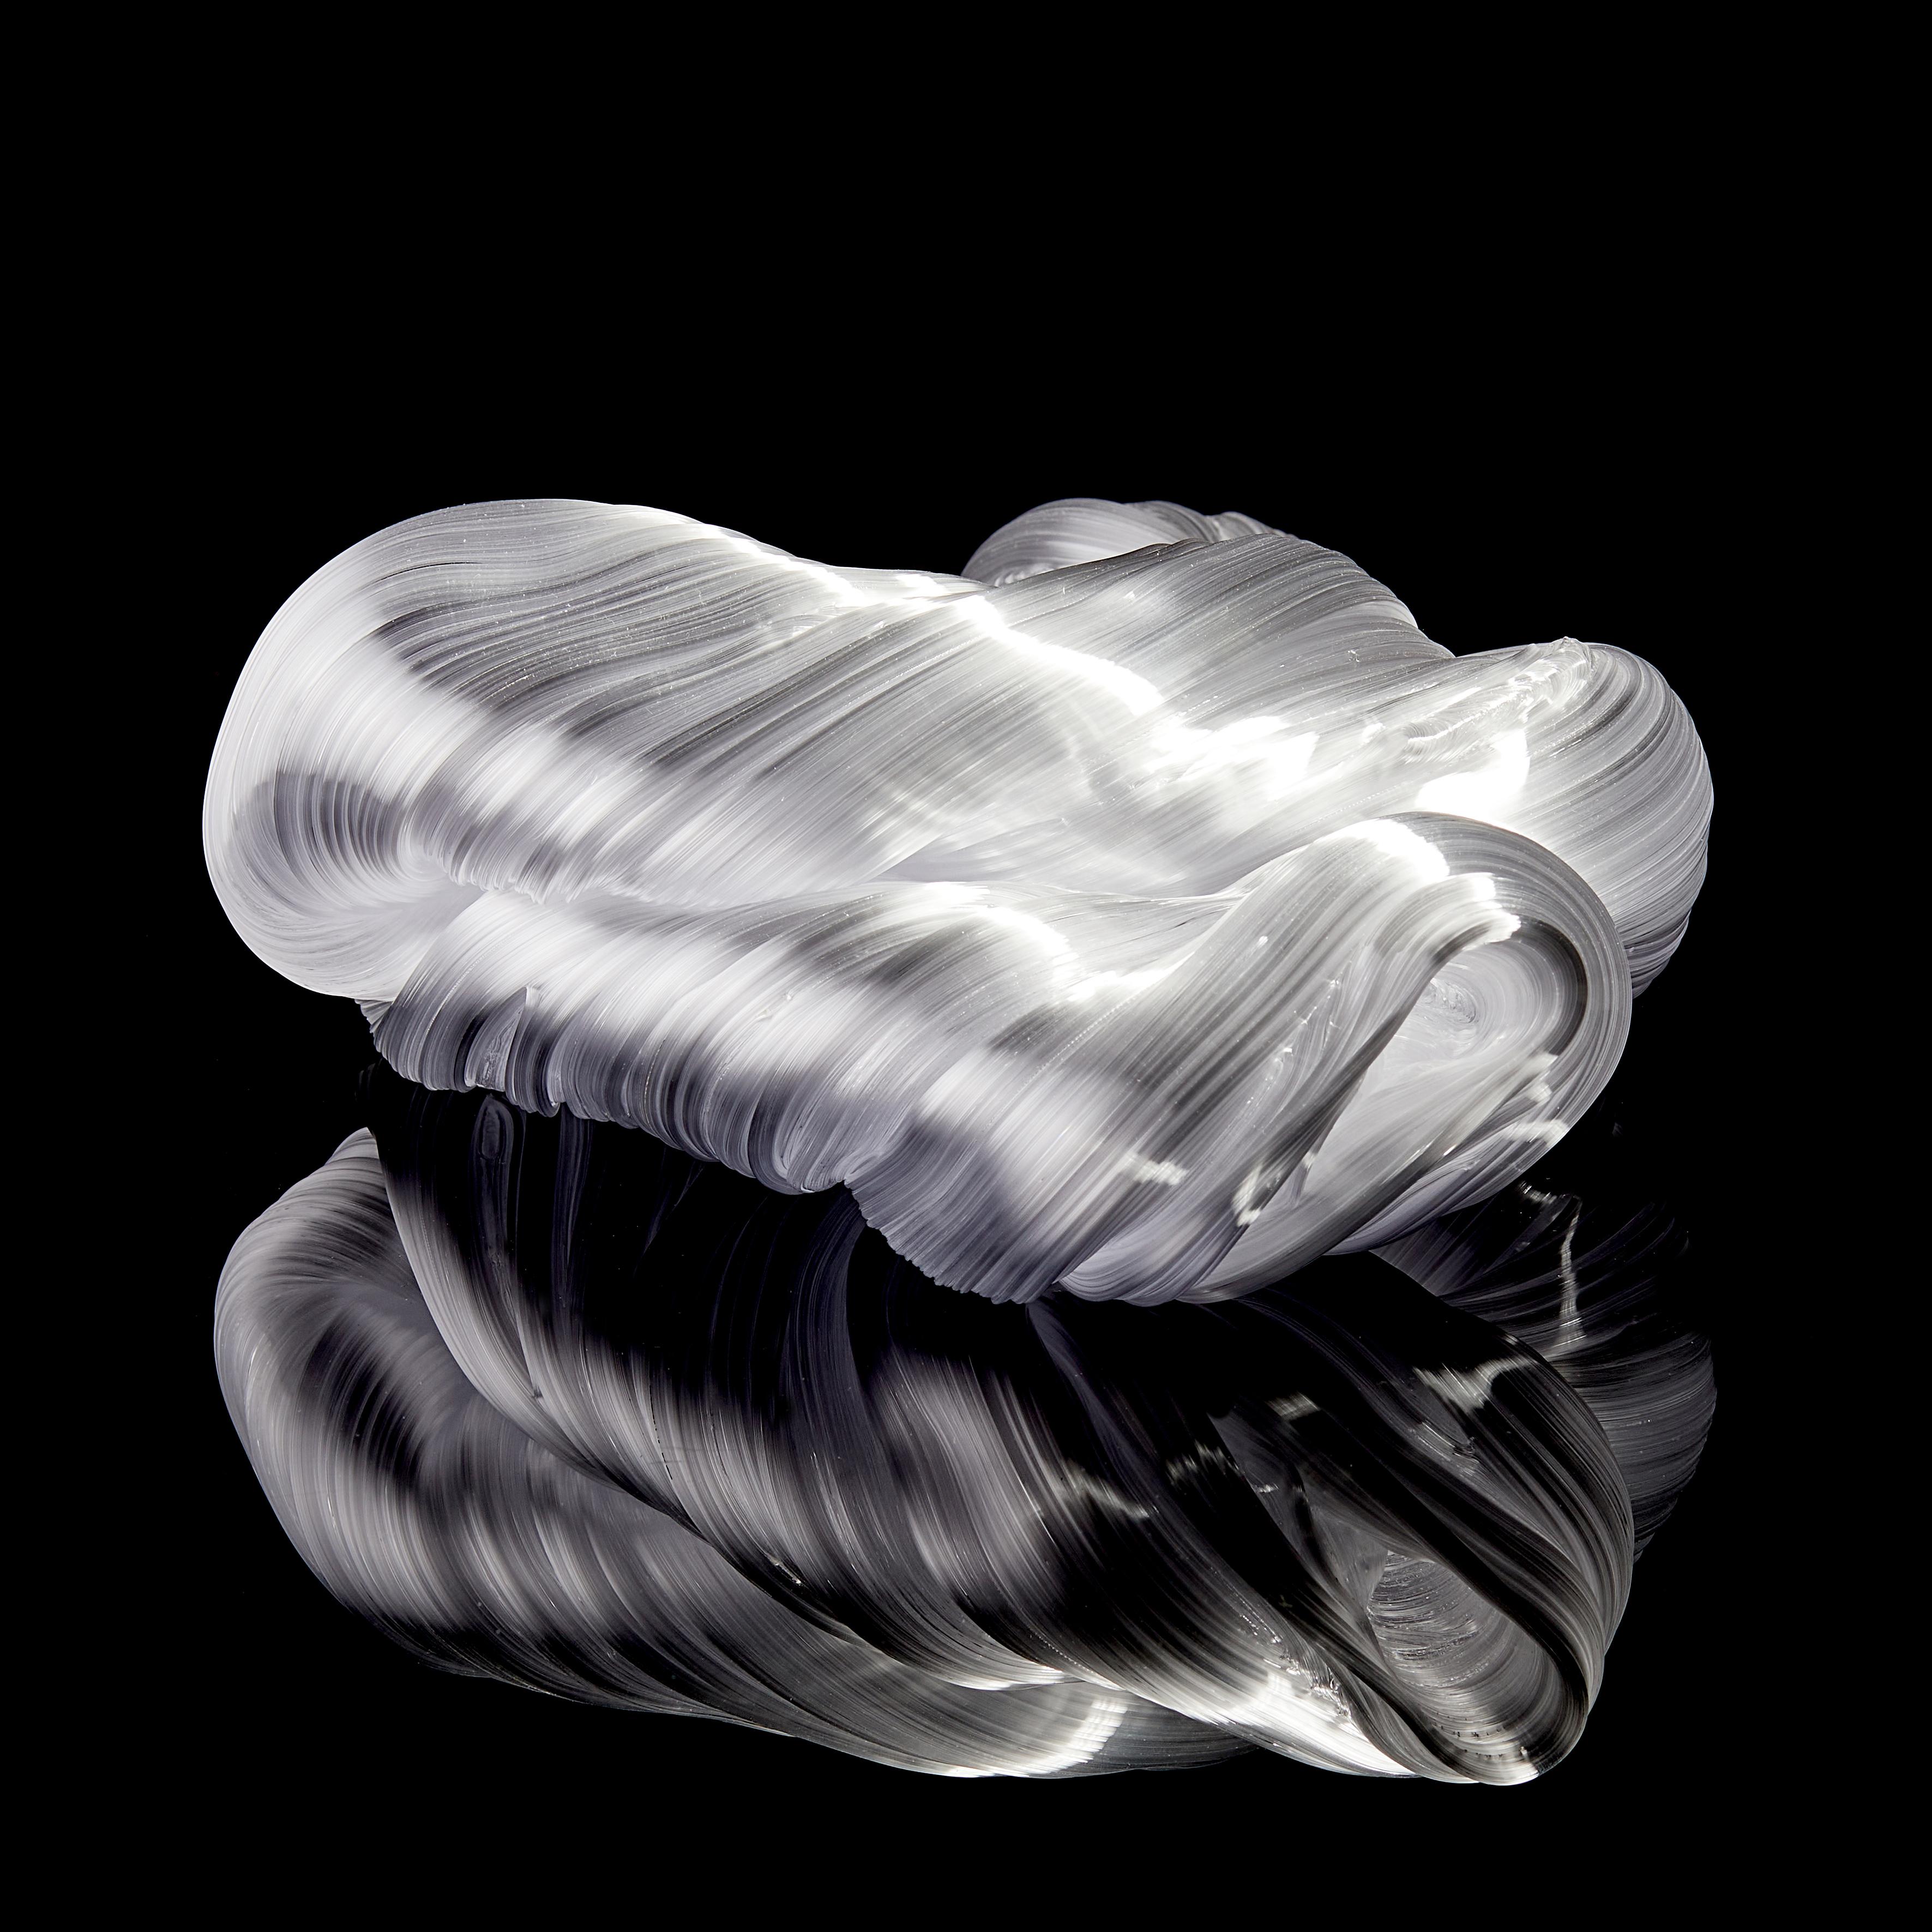 Organic Modern Folded Rock in White, a Unique White Glass Sculpture by Maria Bang Espersen